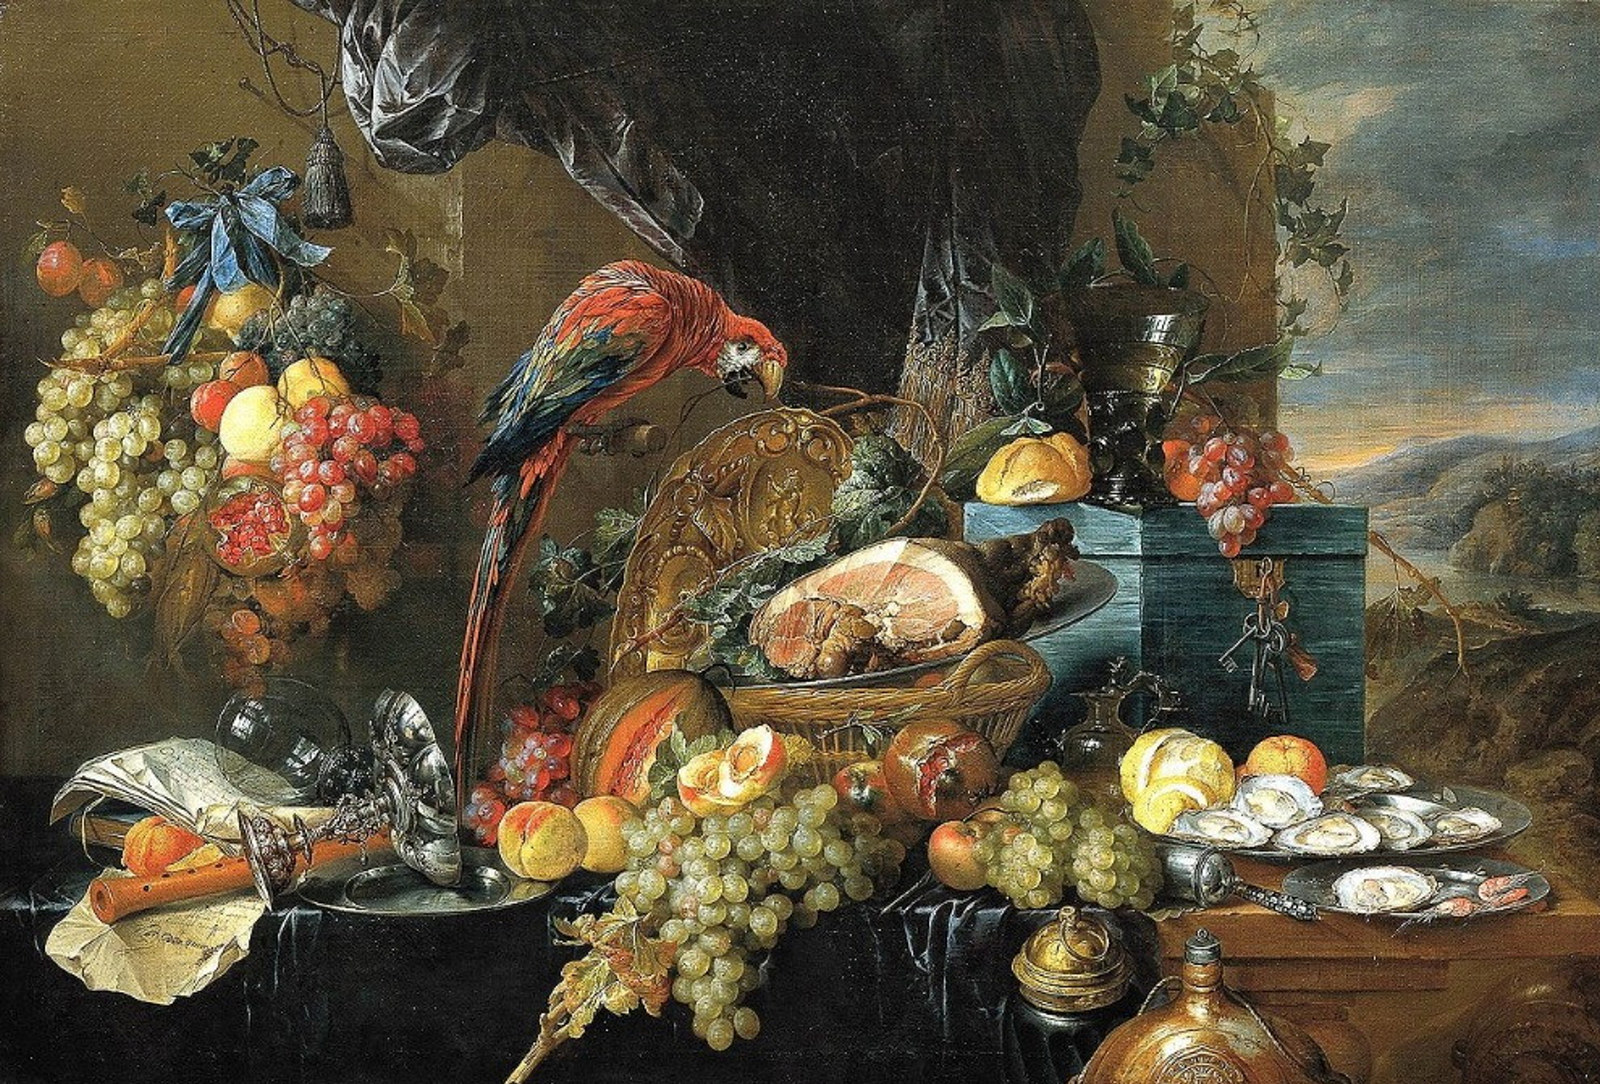 still life painting showing a collection of fruits and foods with a parrot and items of opulence.